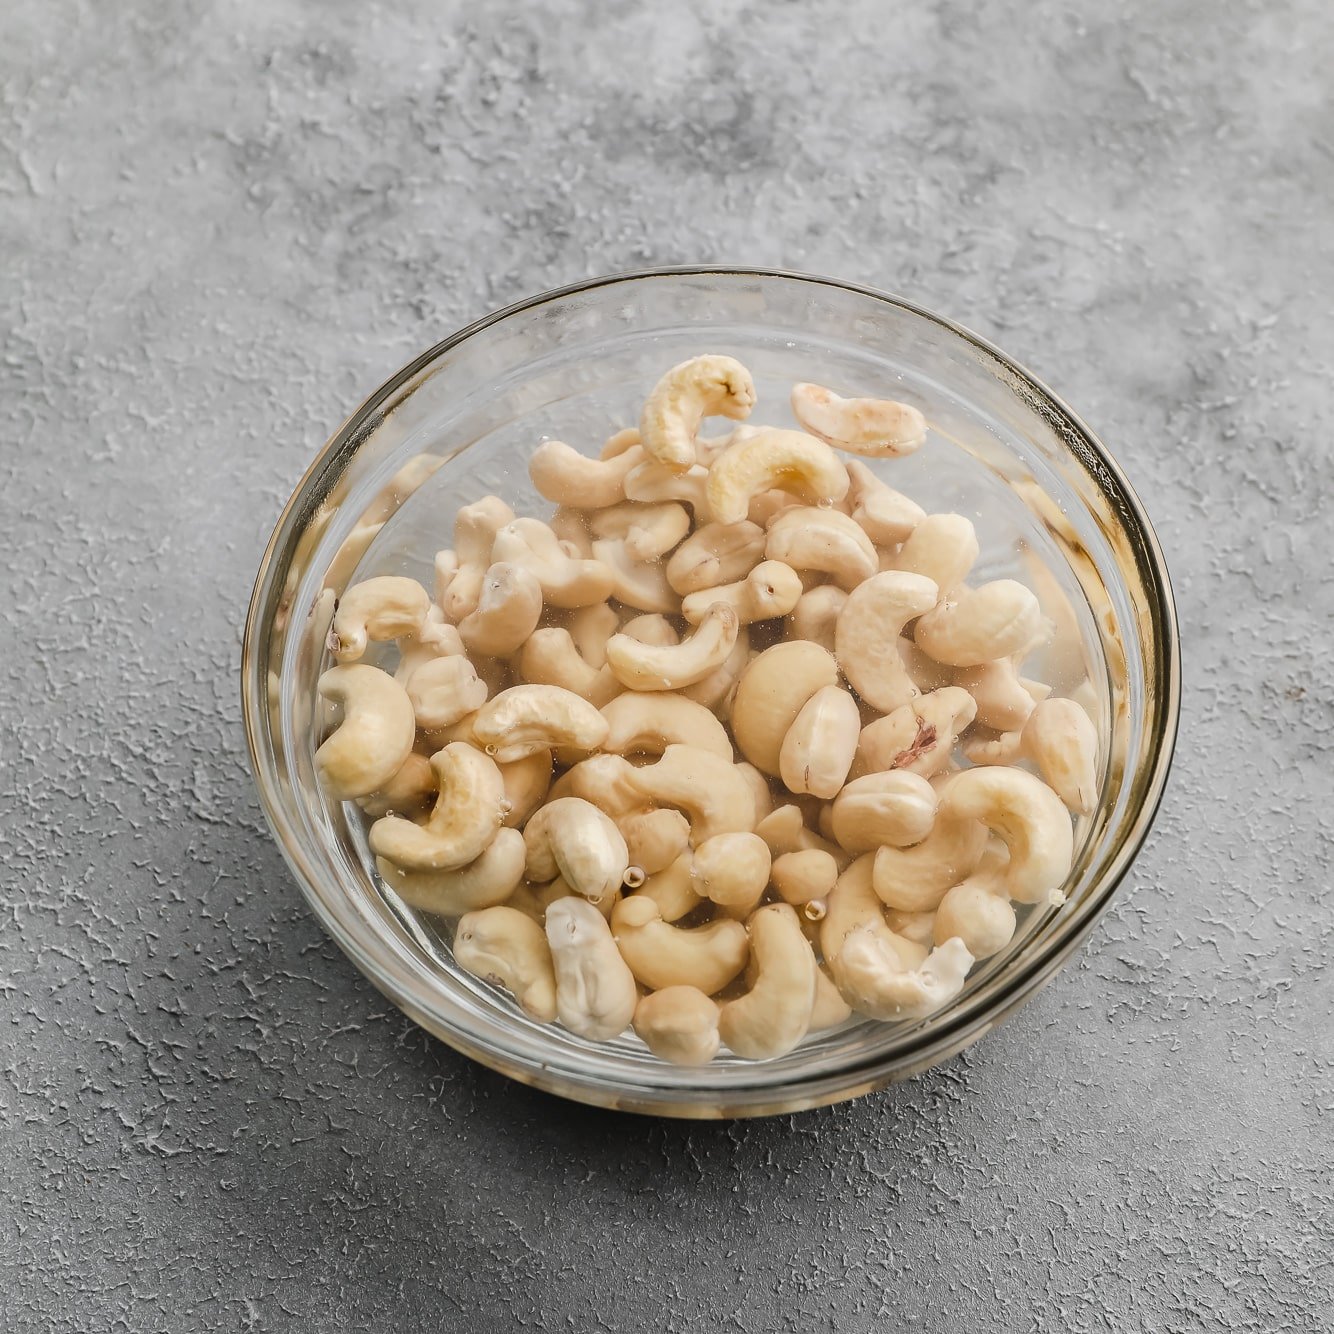 cashews soaking in a glass bowl filled with water.